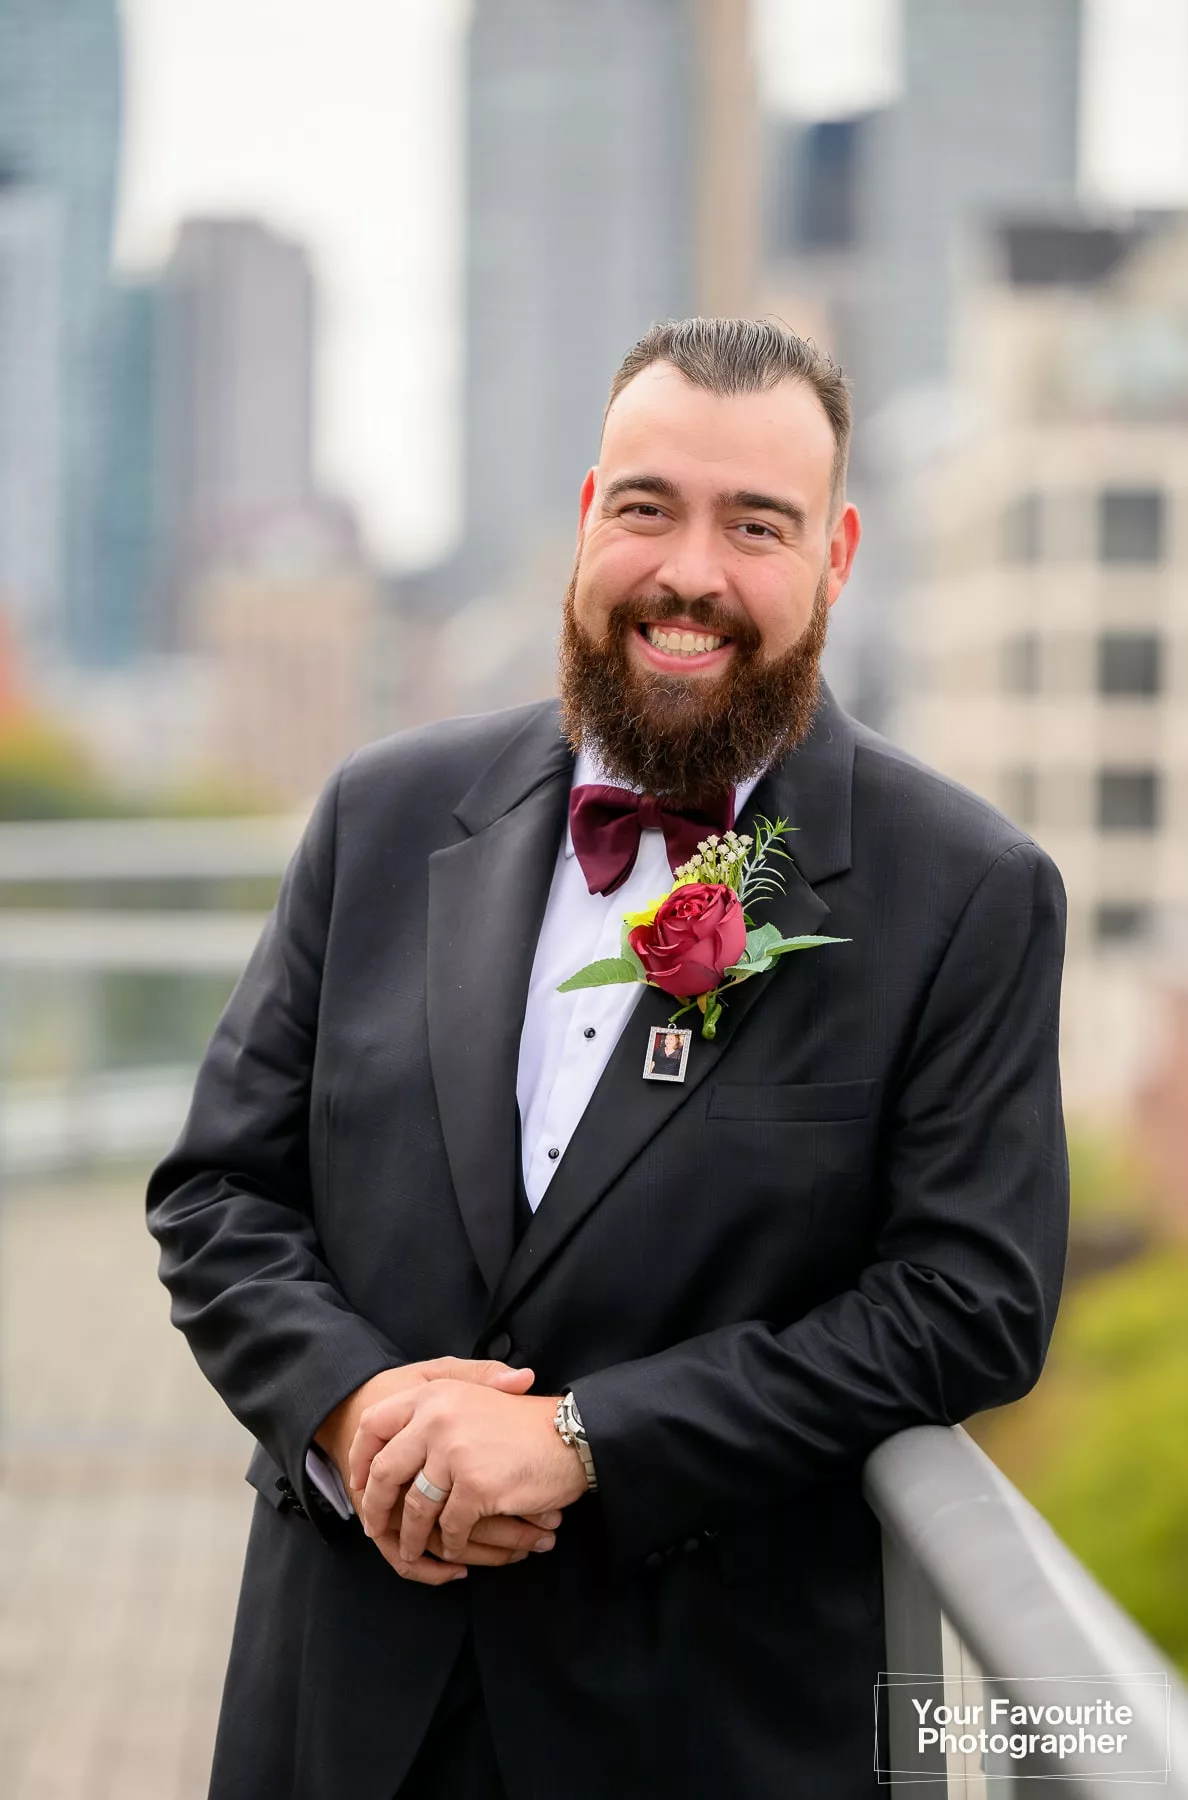 Portrait of a groom, outdoors, in front of the Downtown Toronto skyline